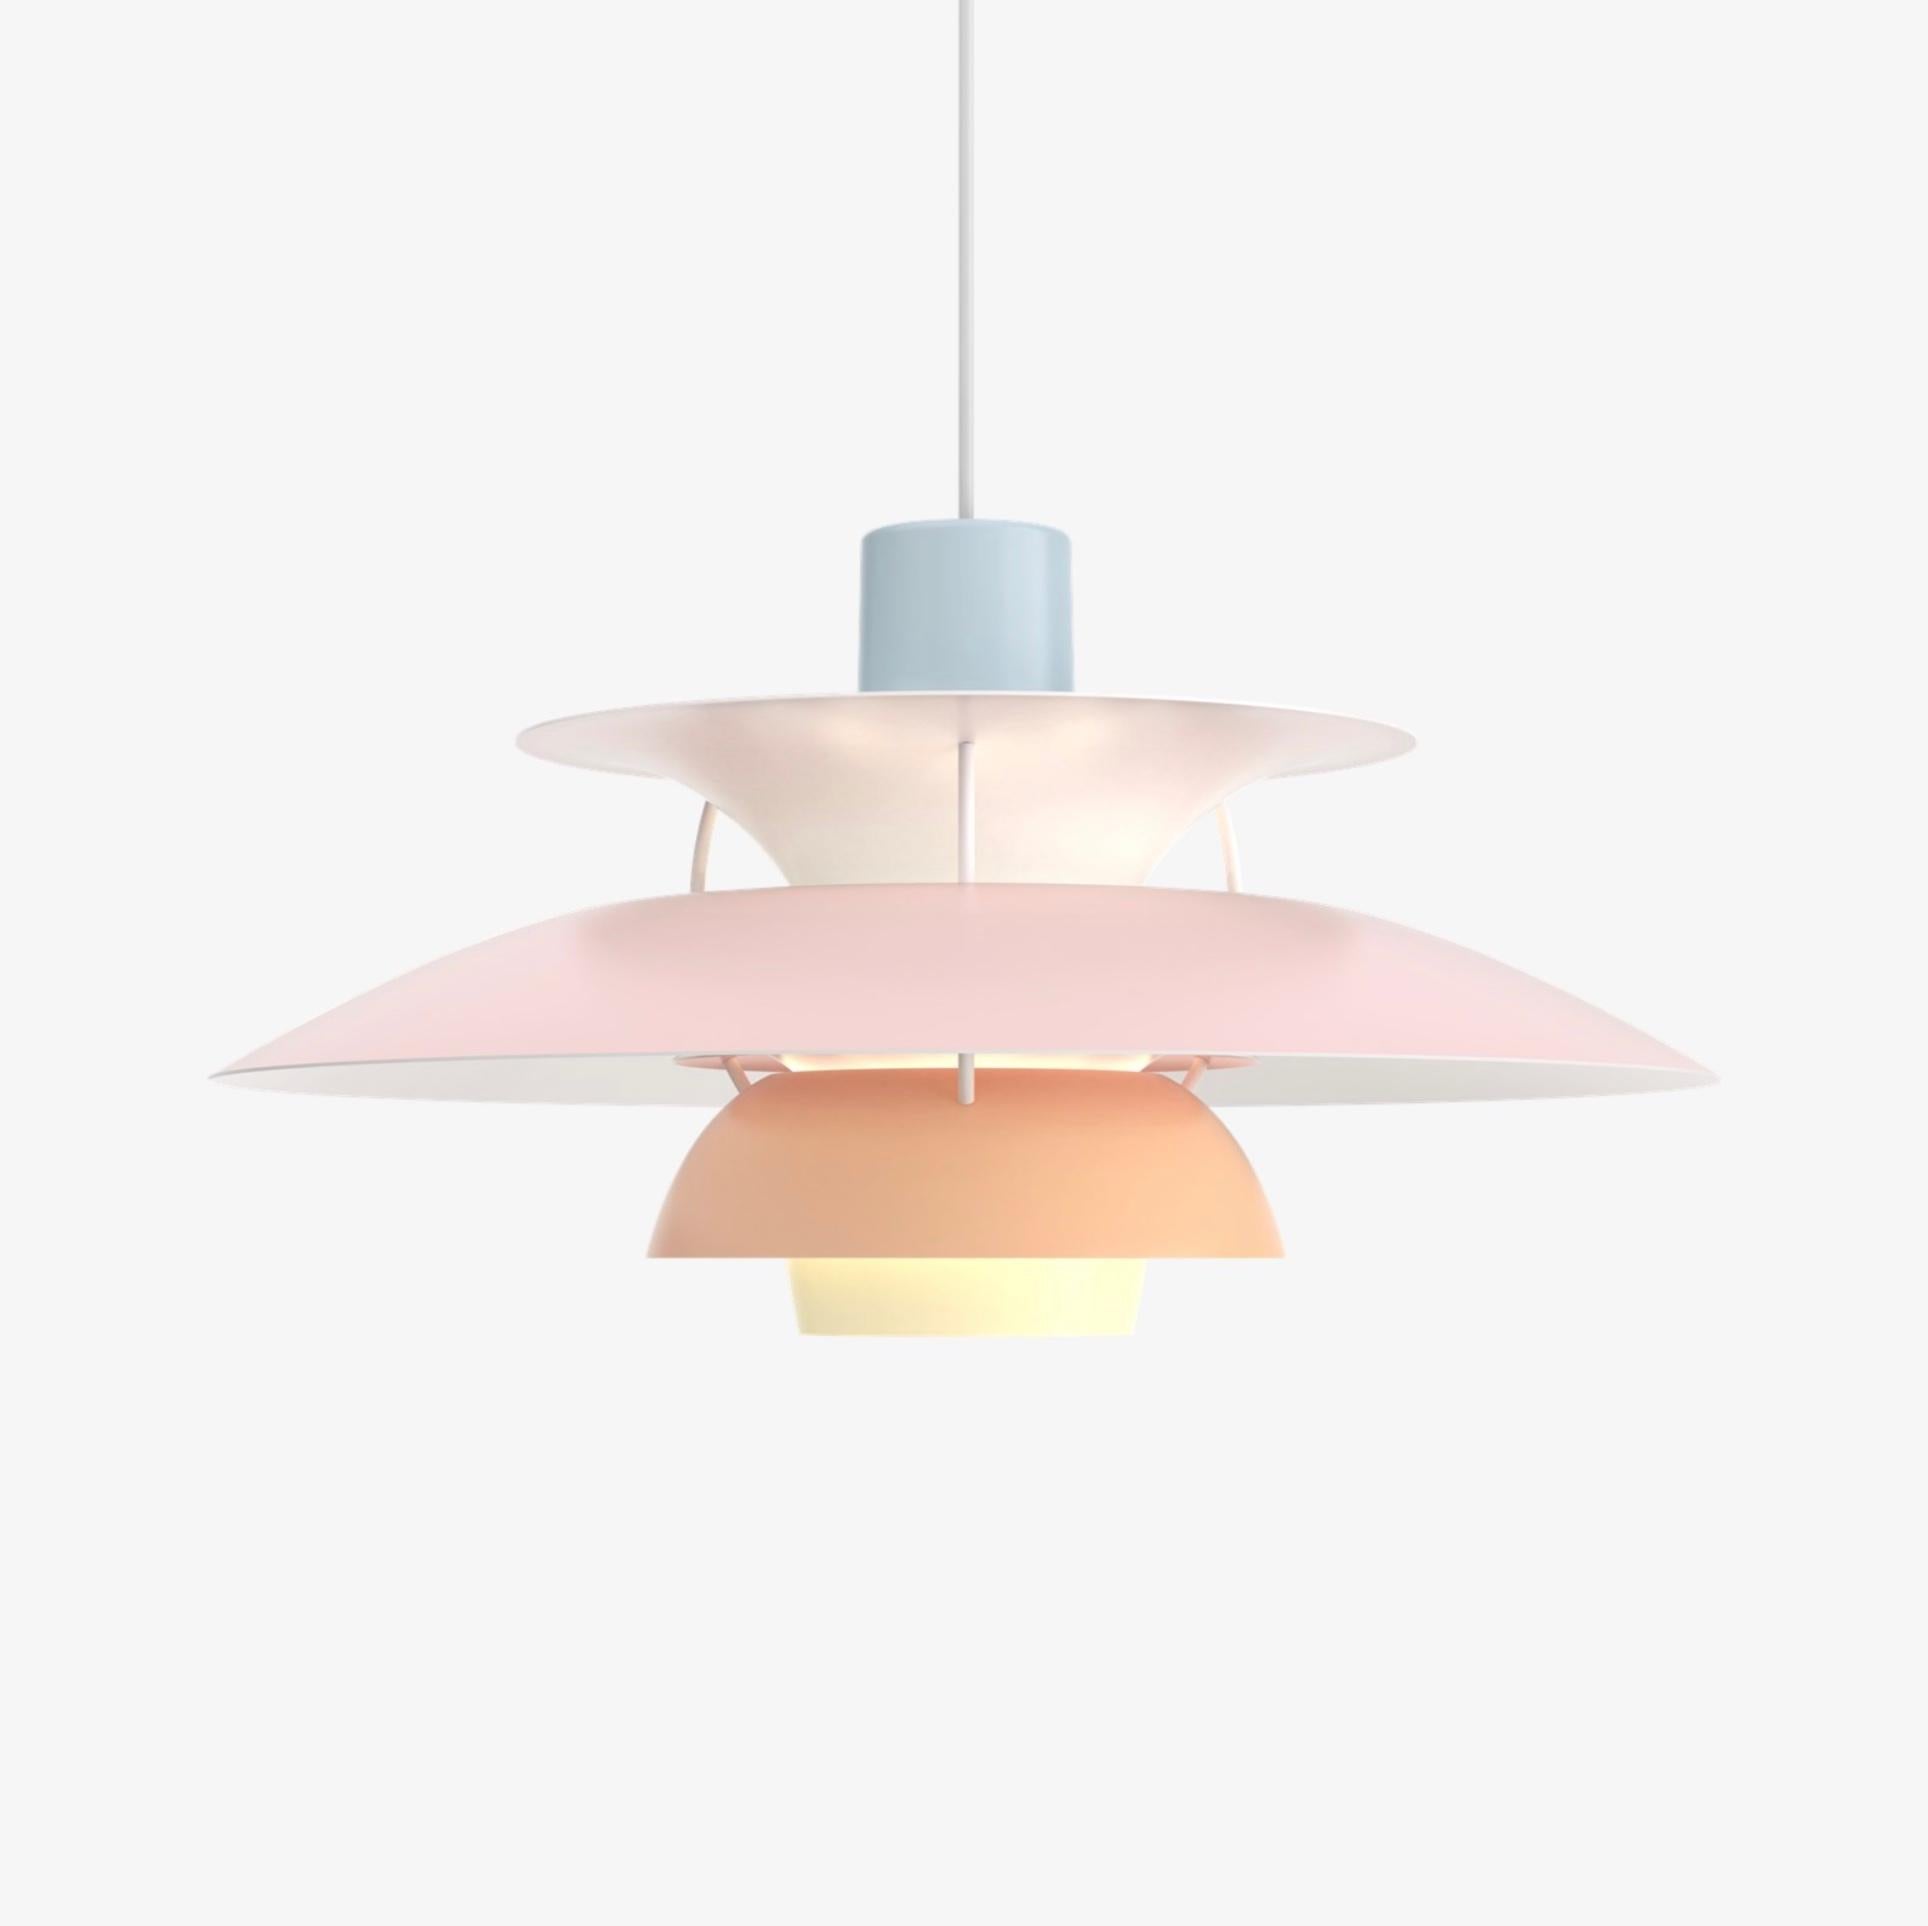 Poul Henningsen PH5 Pendant for Louis Poulsen. Denmark. Designed in 1958. New, current production.

Poul Henningsen developed the PH 5 in 1958 in response to constant changes made to the shape and size of incandescent bulbs by bulb manufacturers,